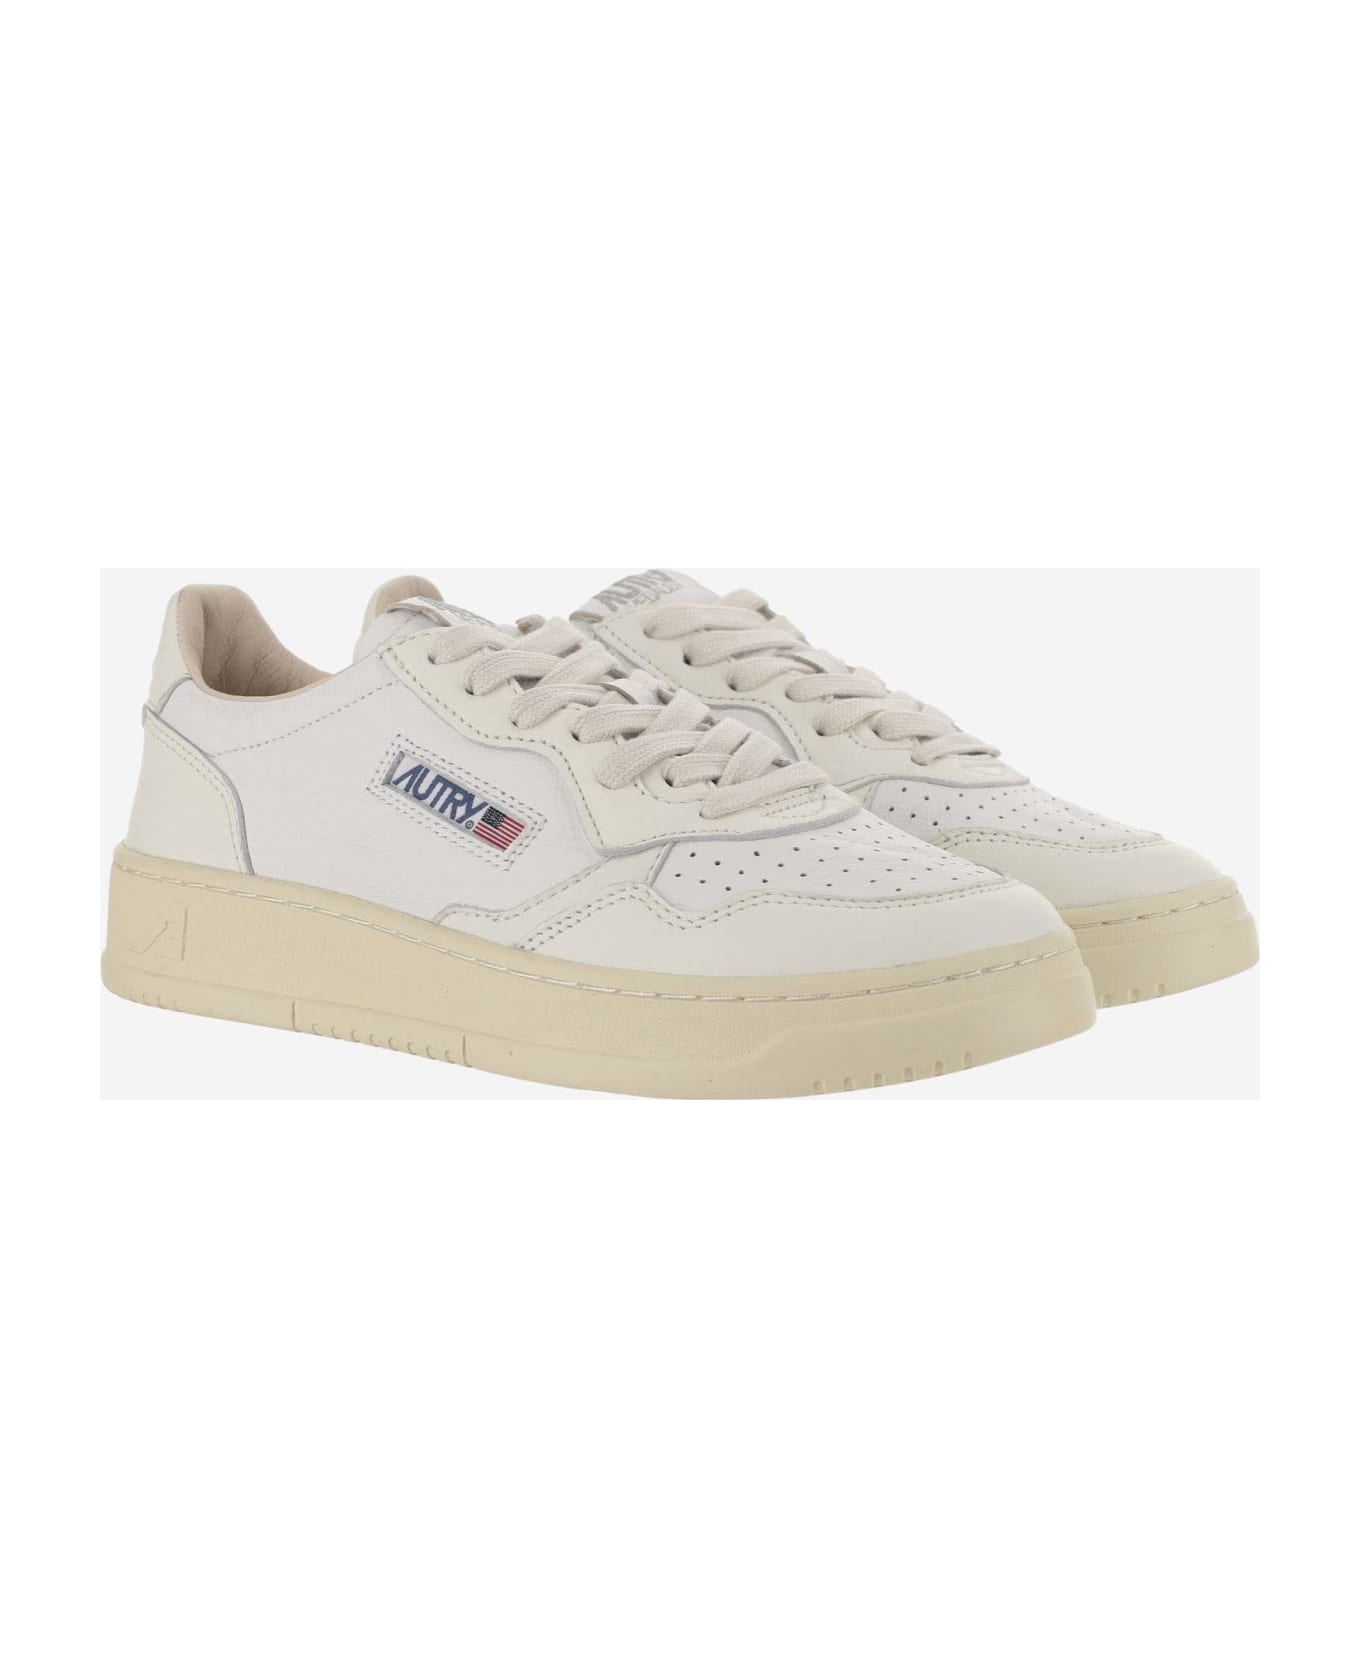 Autry Medalist Leather Sneakers - WHT/WHT